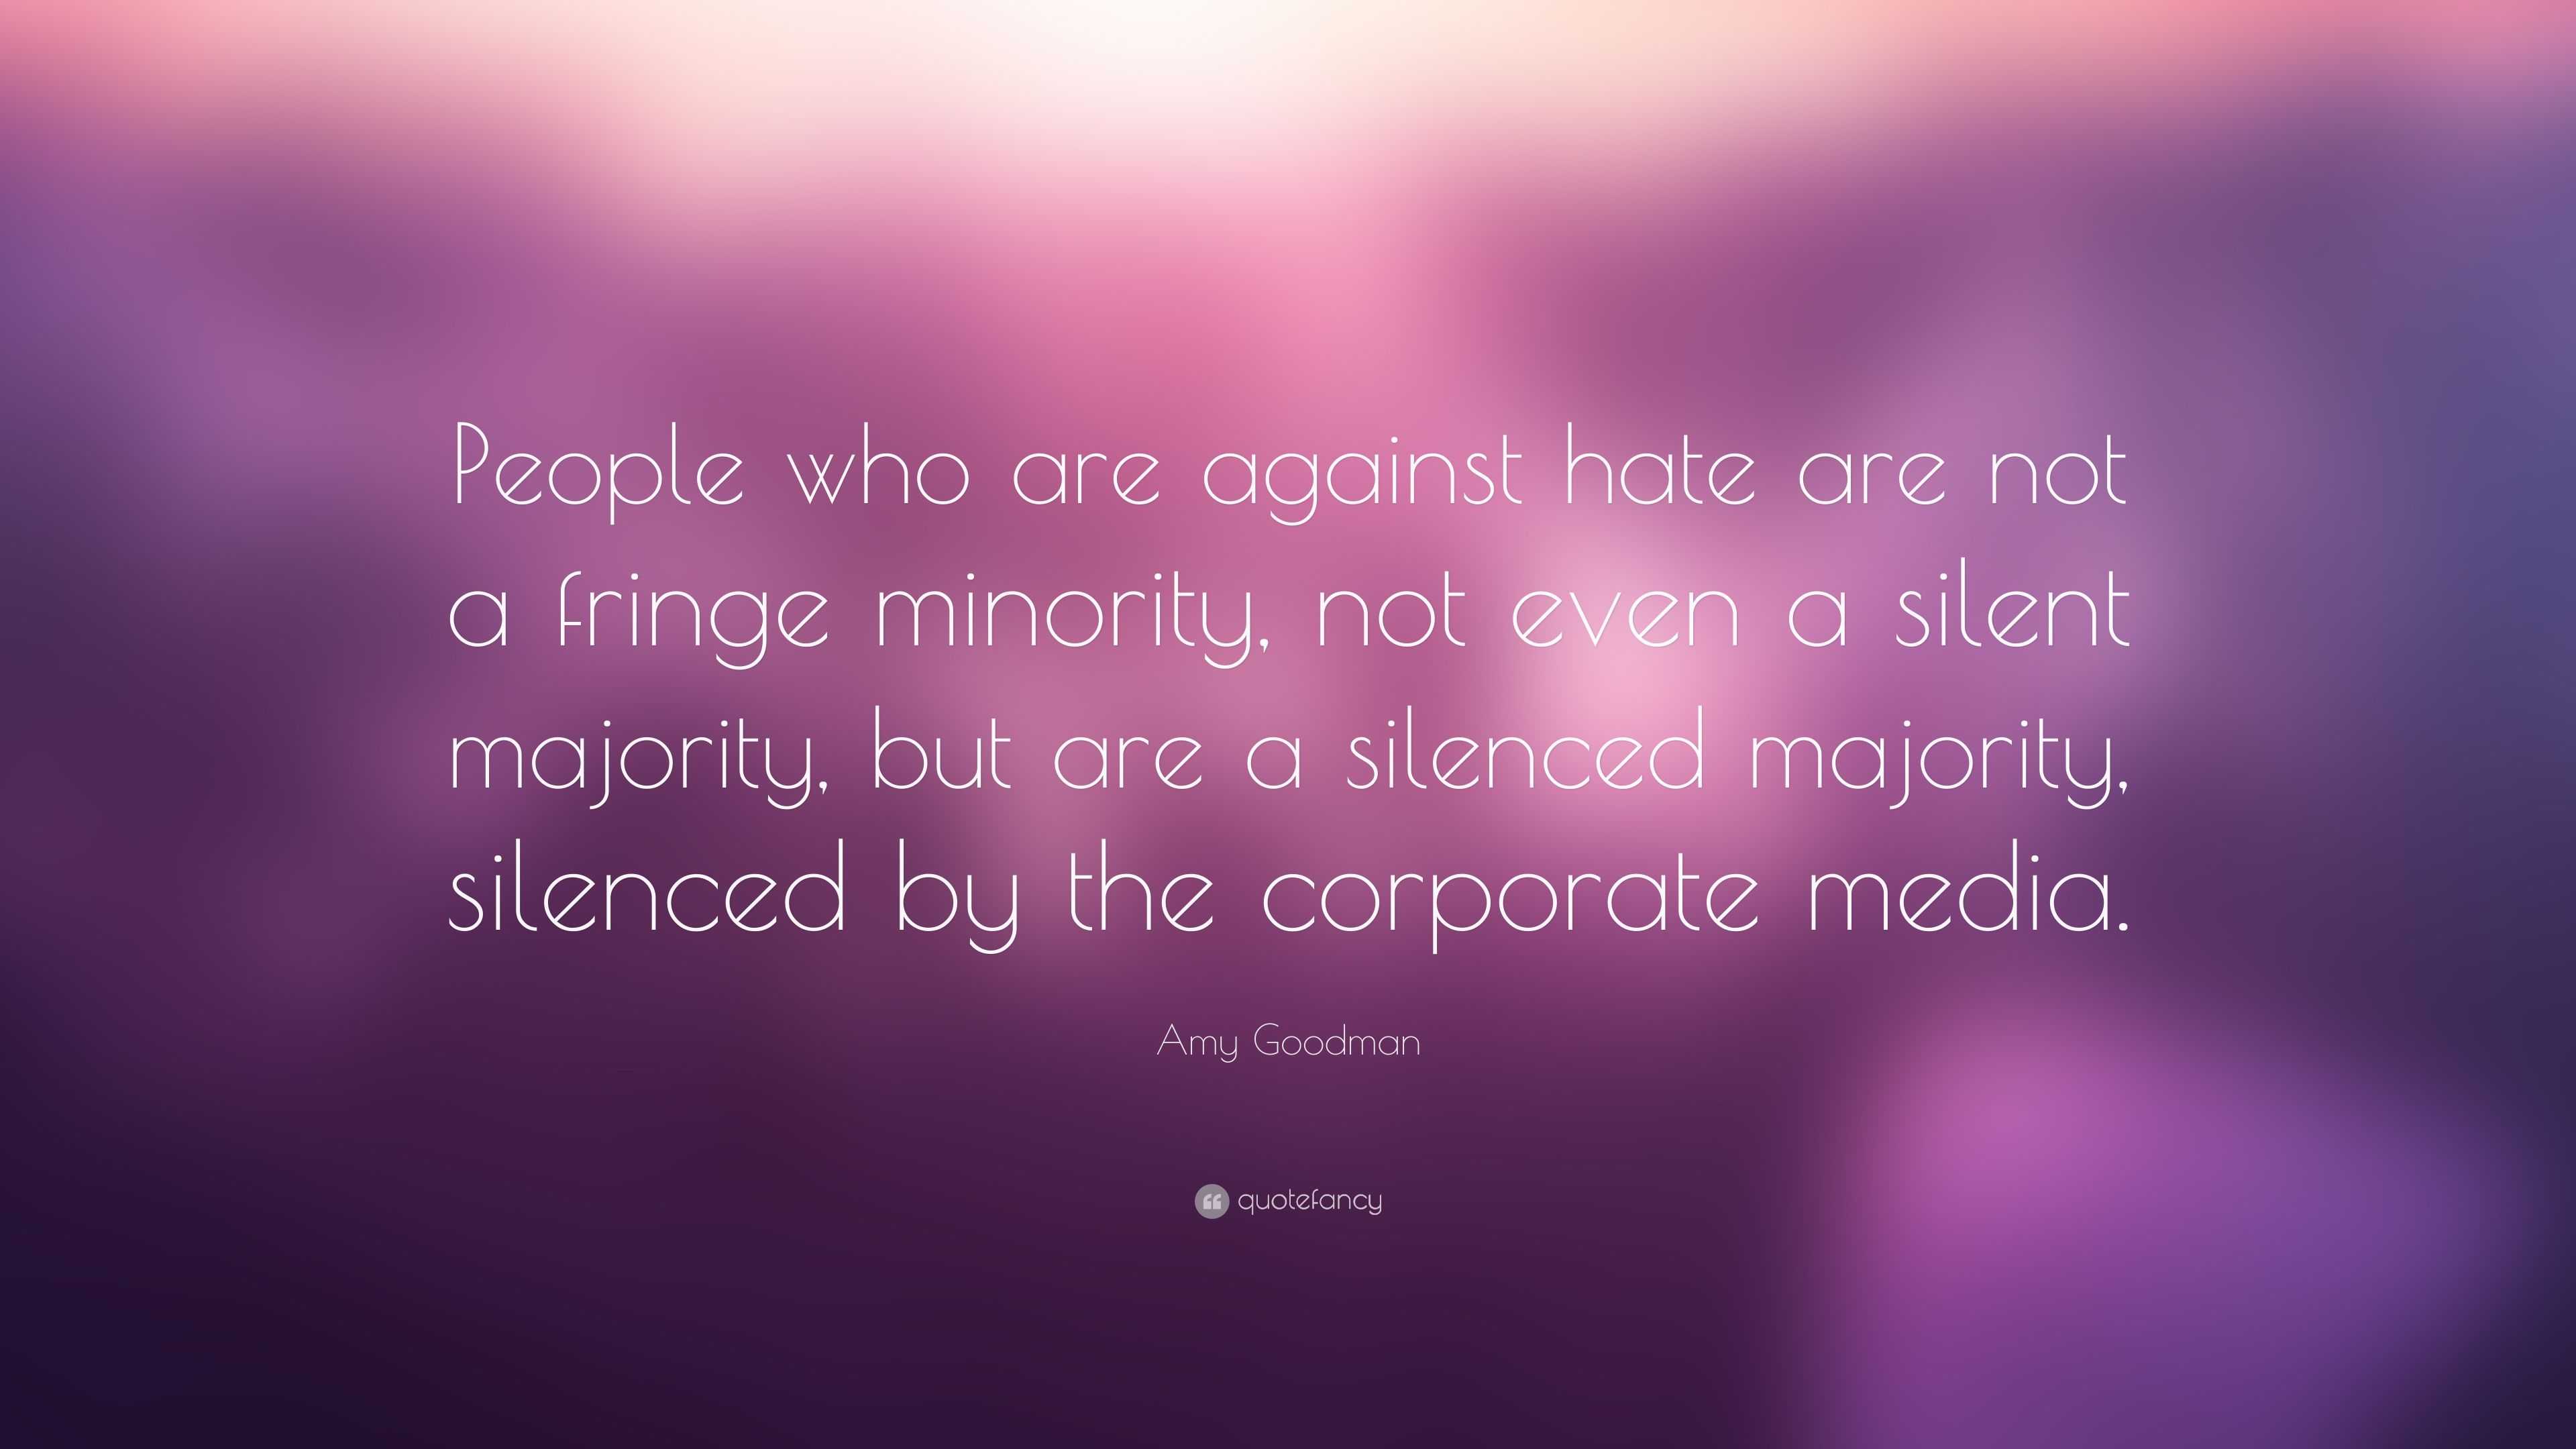 Amy Goodman Quote: “People who are against hate are not a fringe ...